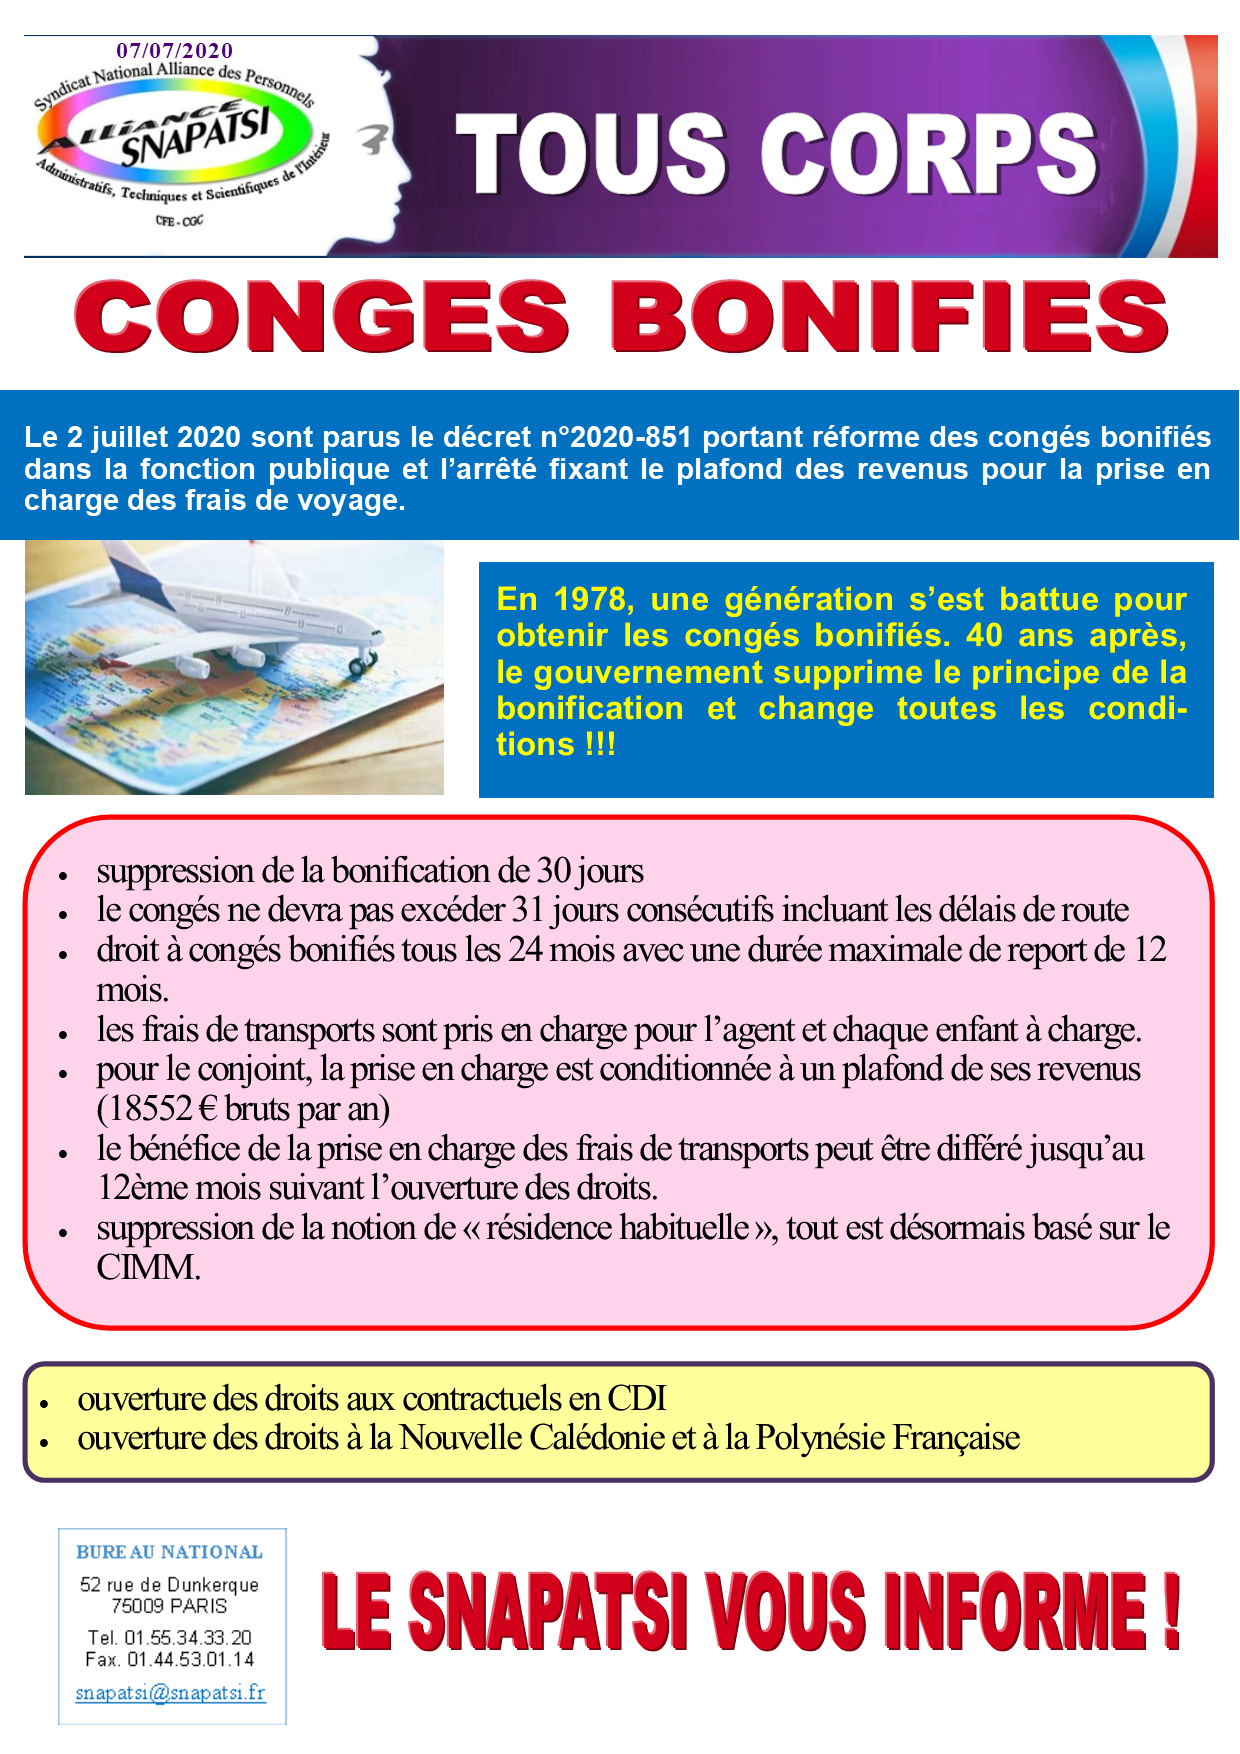 Tract conges bonifies 07072020